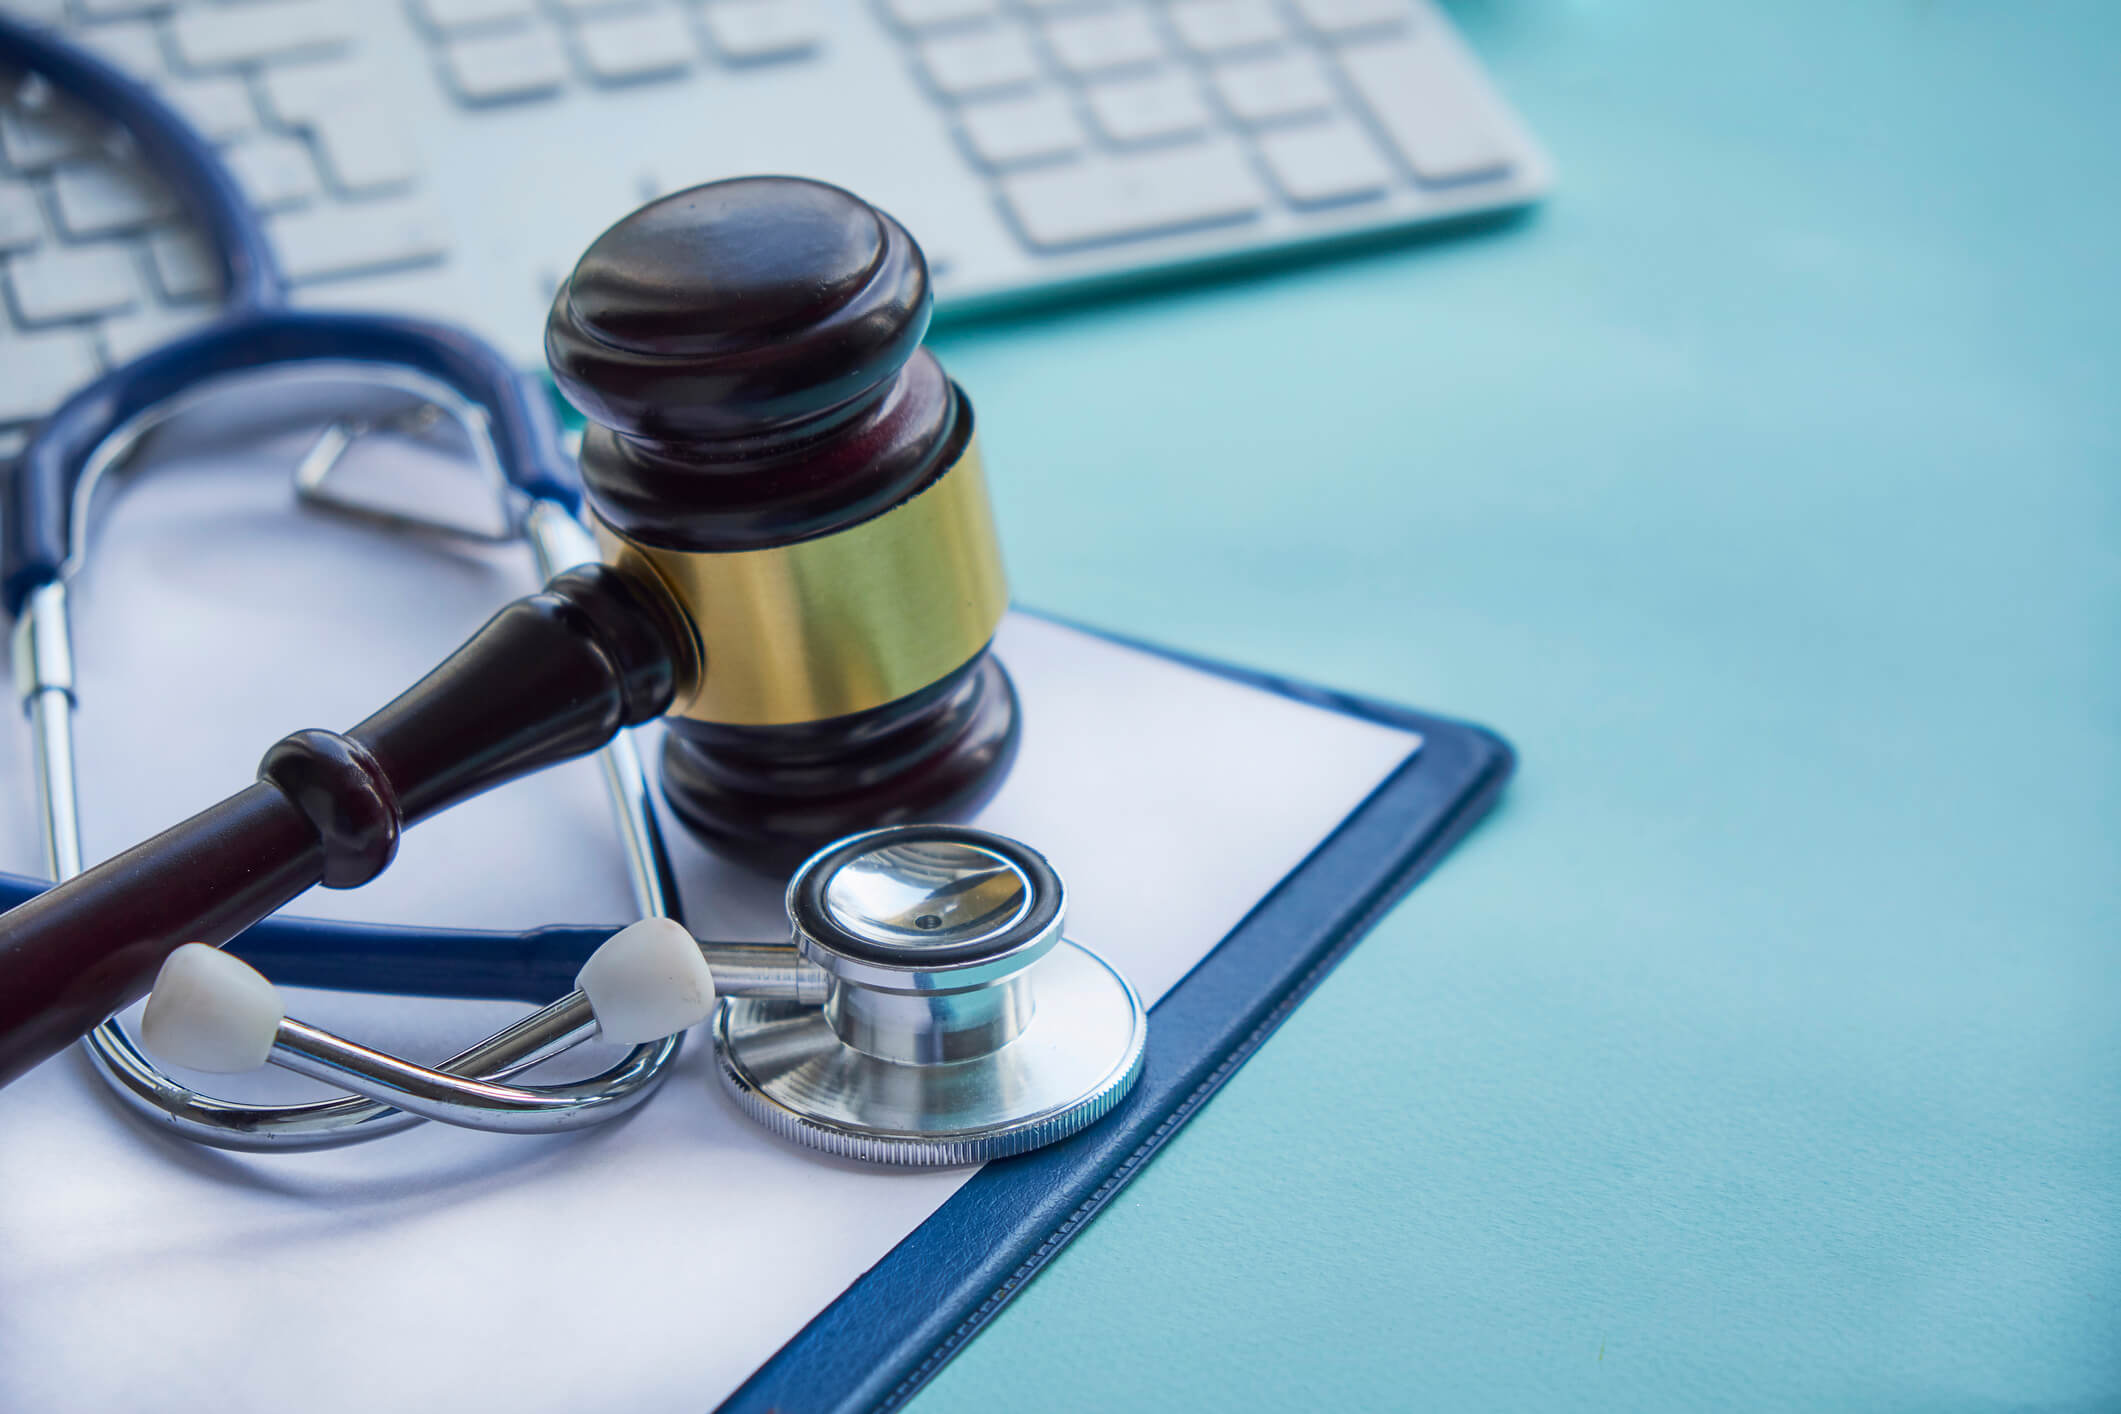 Scaffidi & Associates discusses whether or not punitive damages are available in medical malpractice cases.